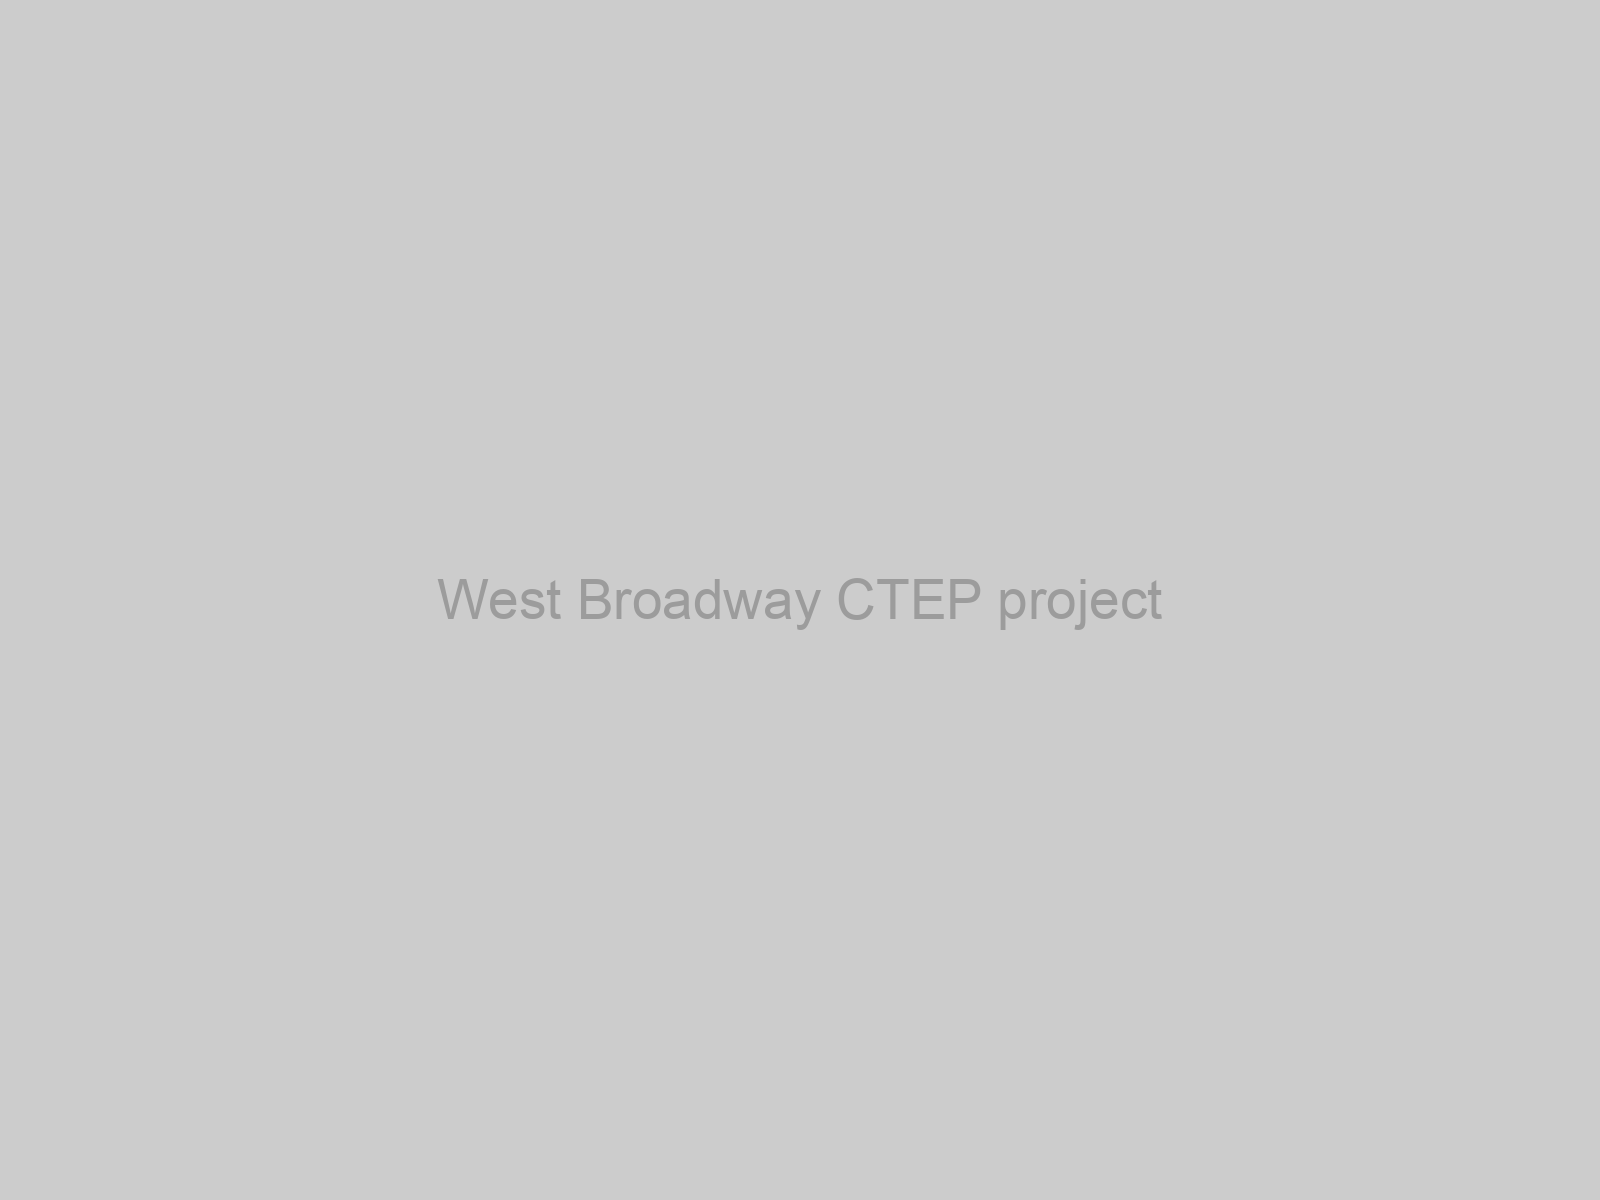 West Broadway CTEP project